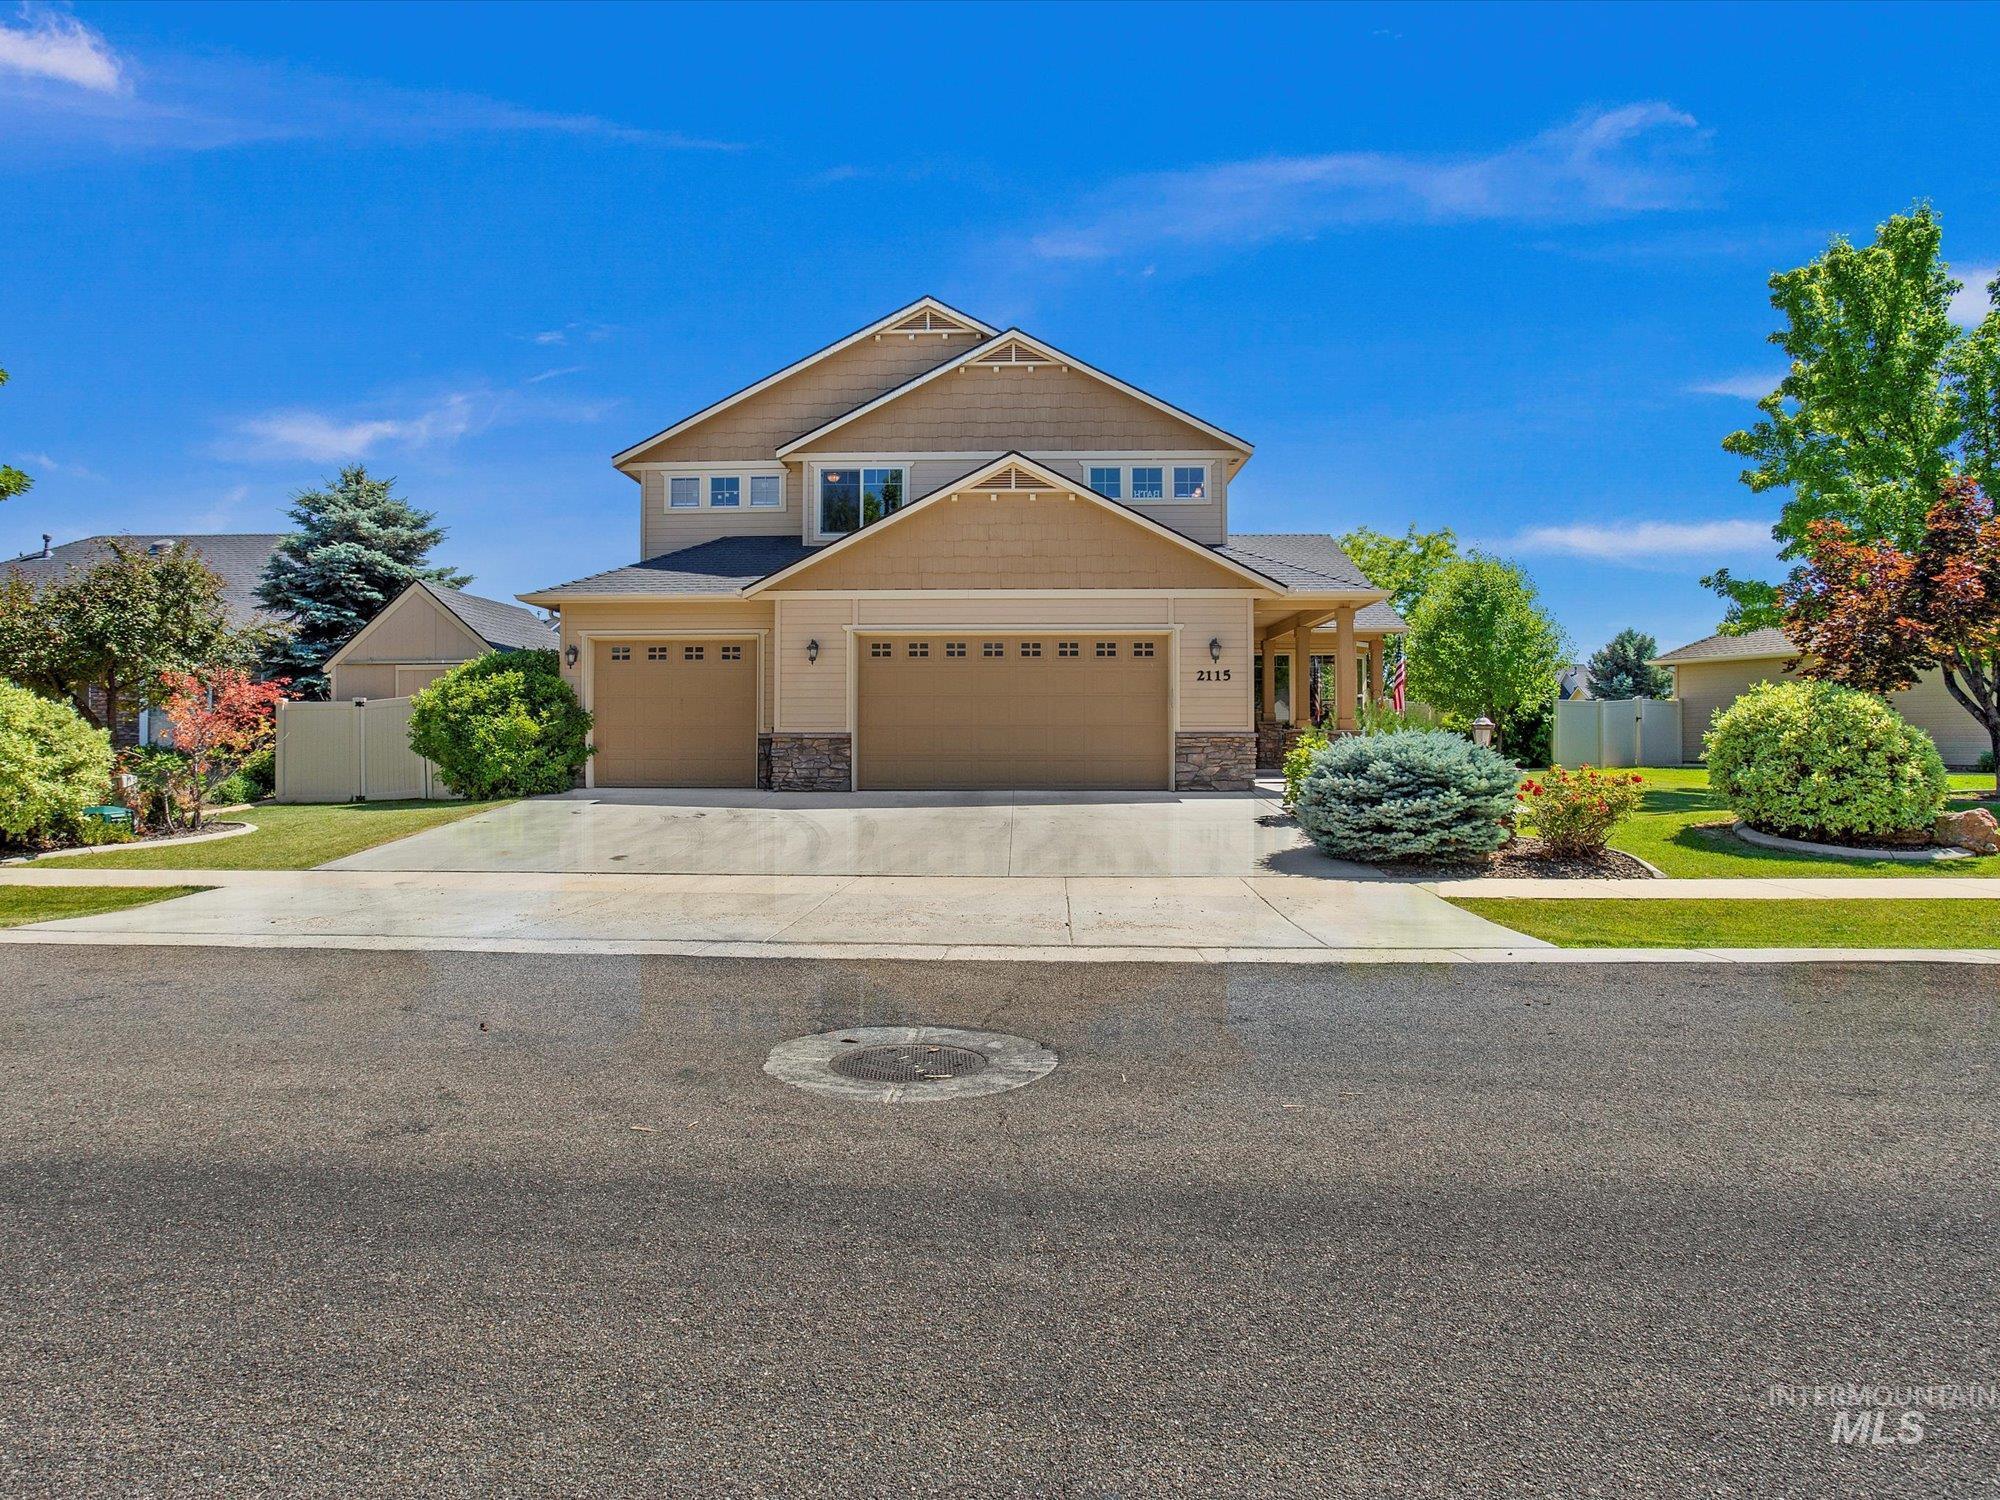 2115 W Rock Creek Dr, Nampa, Idaho 83686-5339, 3 Bedrooms, 2.5 Bathrooms, Residential For Sale, Price $625,000,MLS 98849935